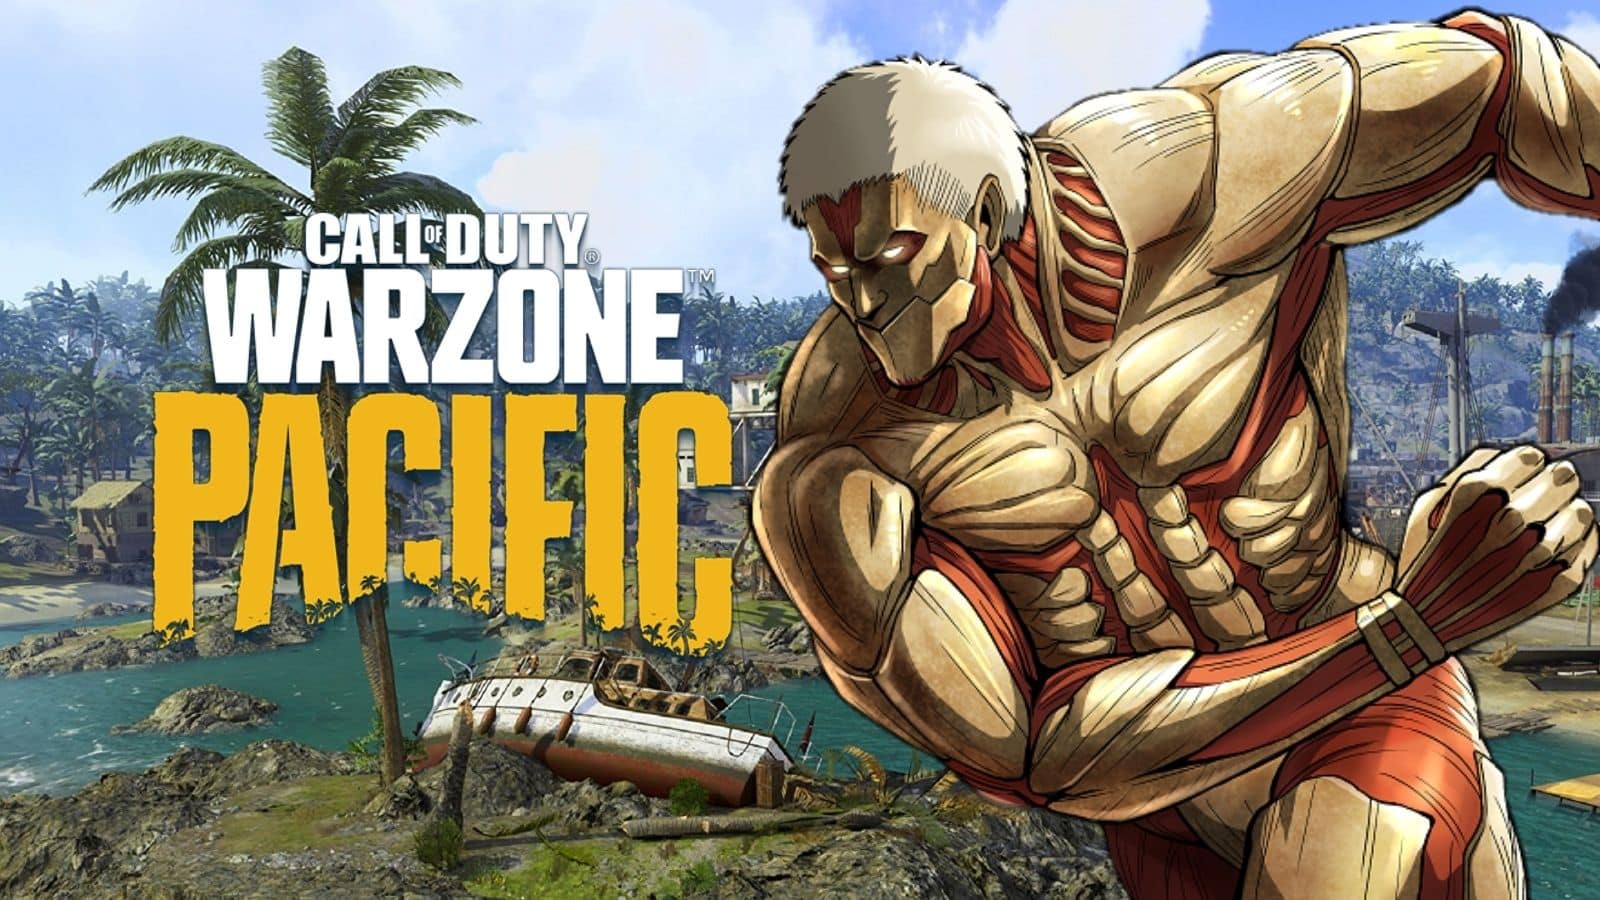 Attack on Titan' x 'Call of Duty' Crossover Bundle Pack